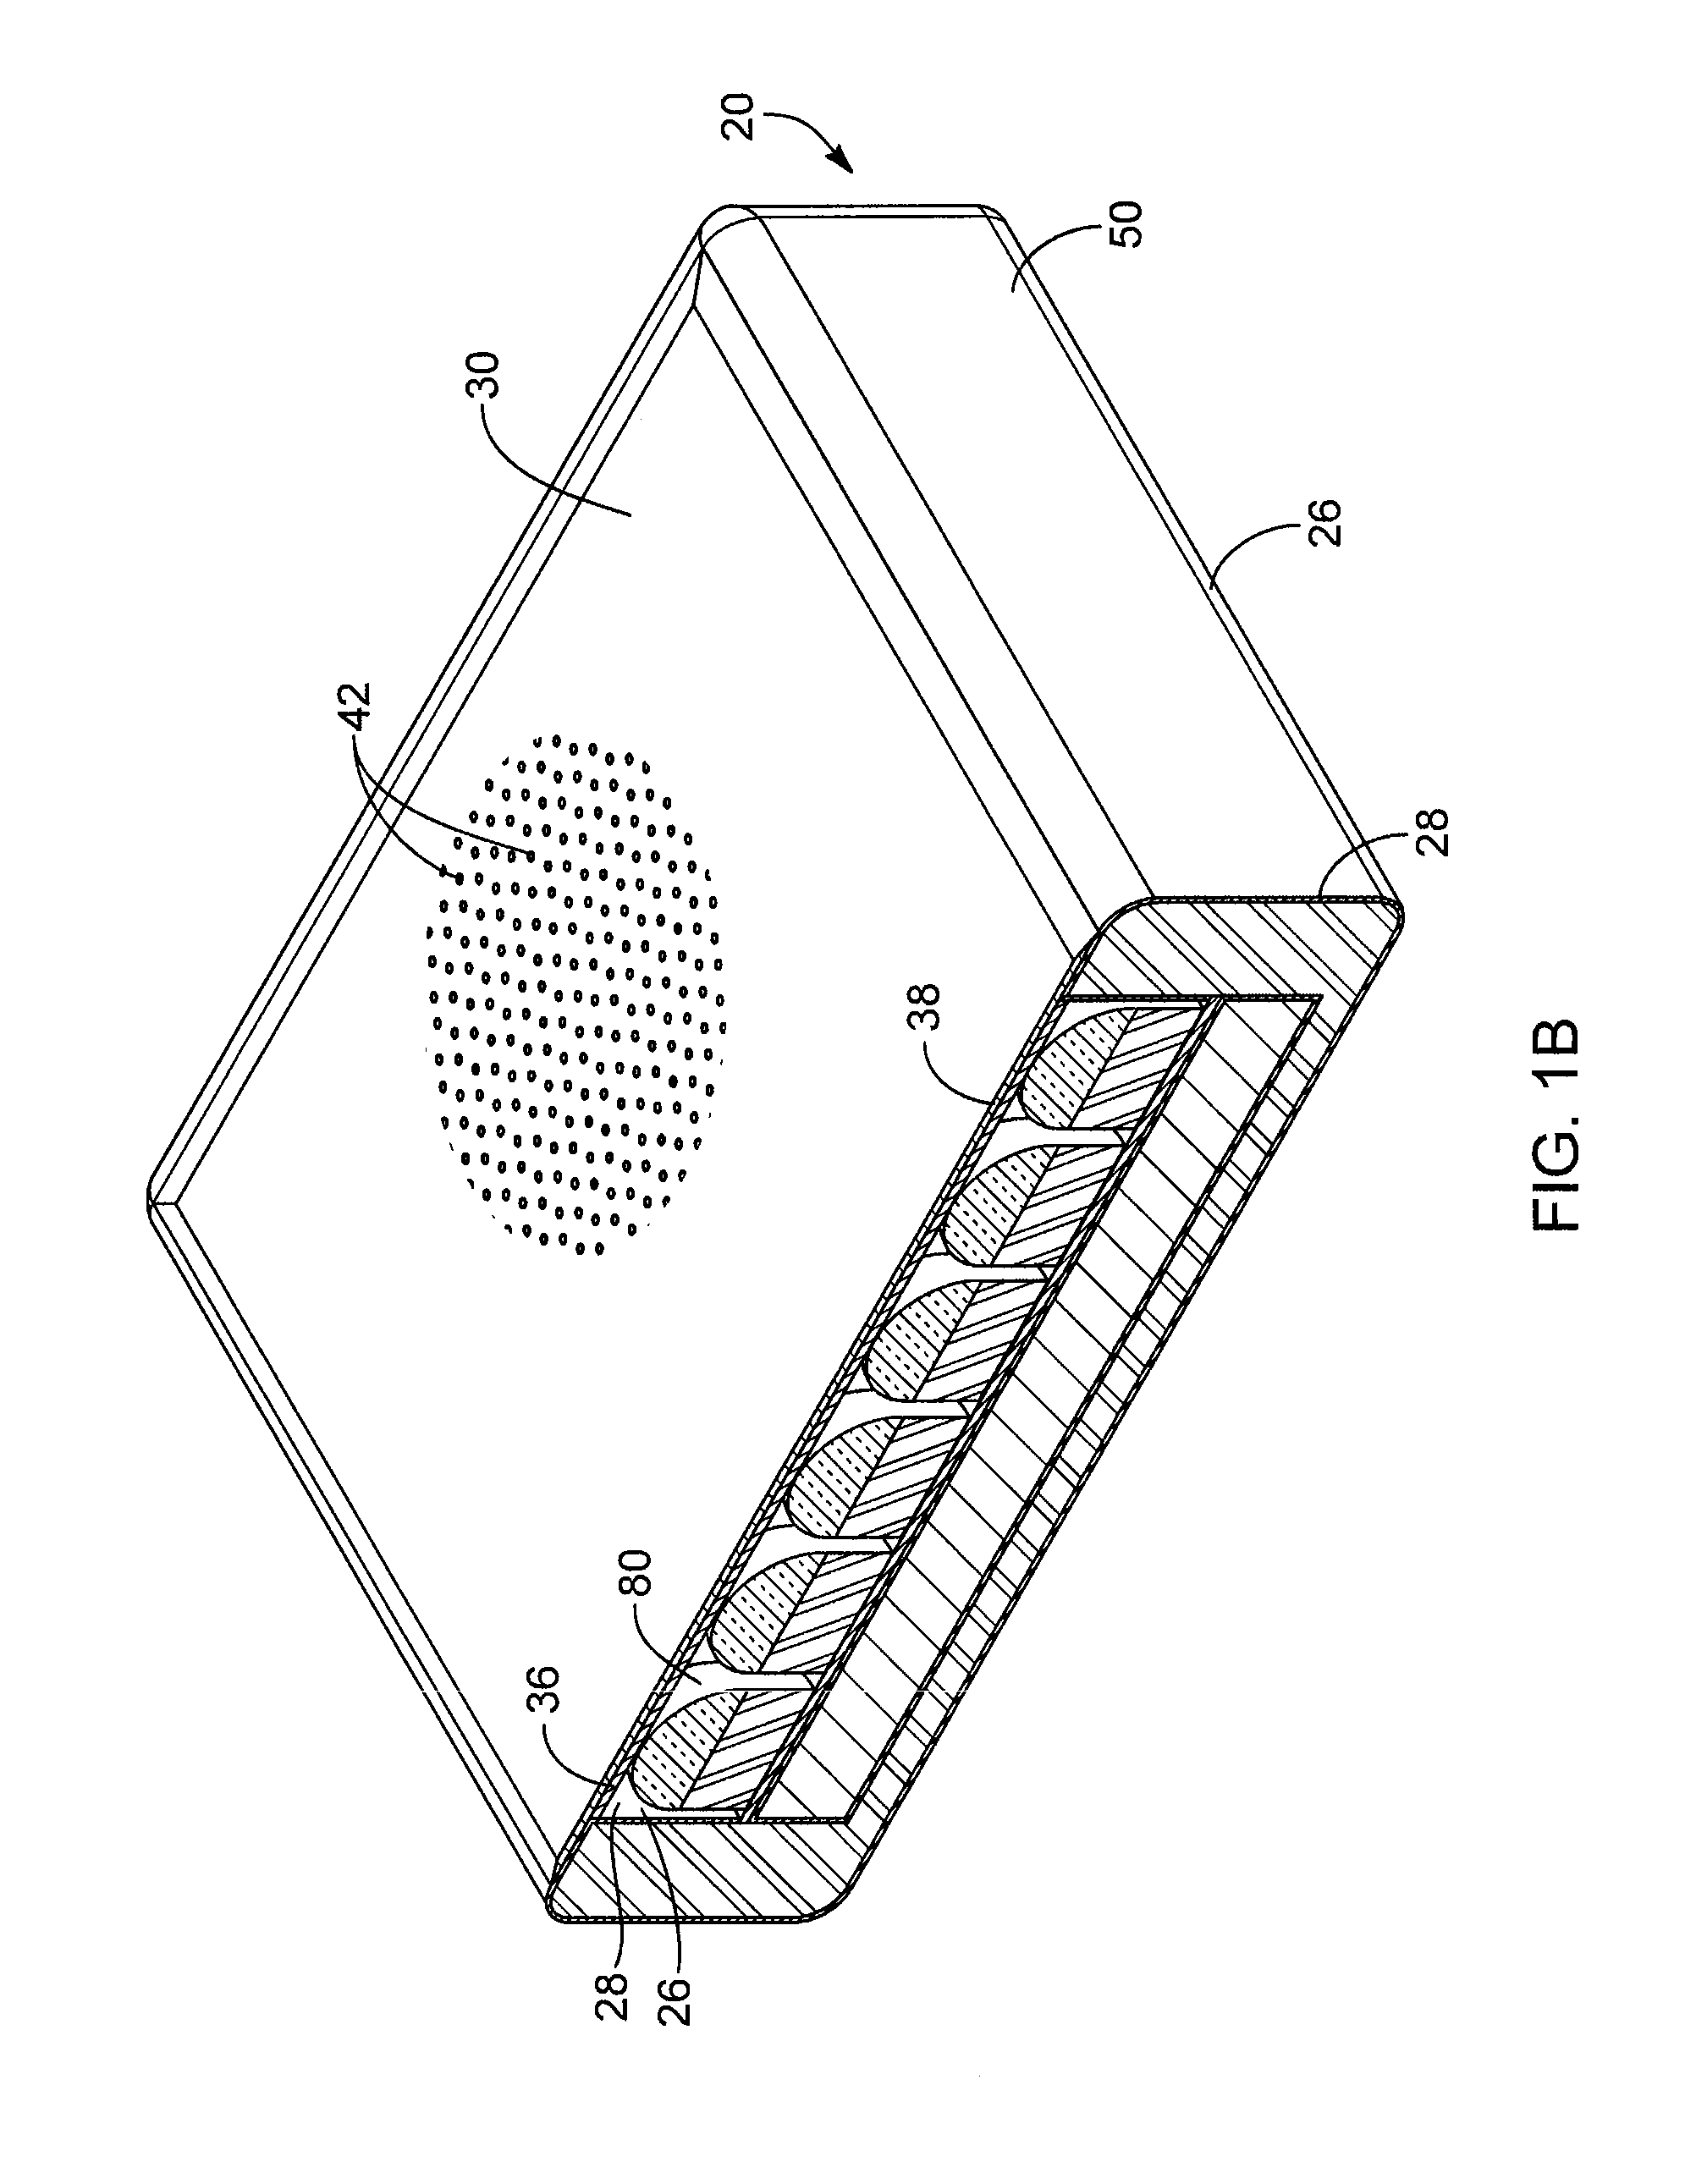 Systems and methods for providing a self deflating cushion